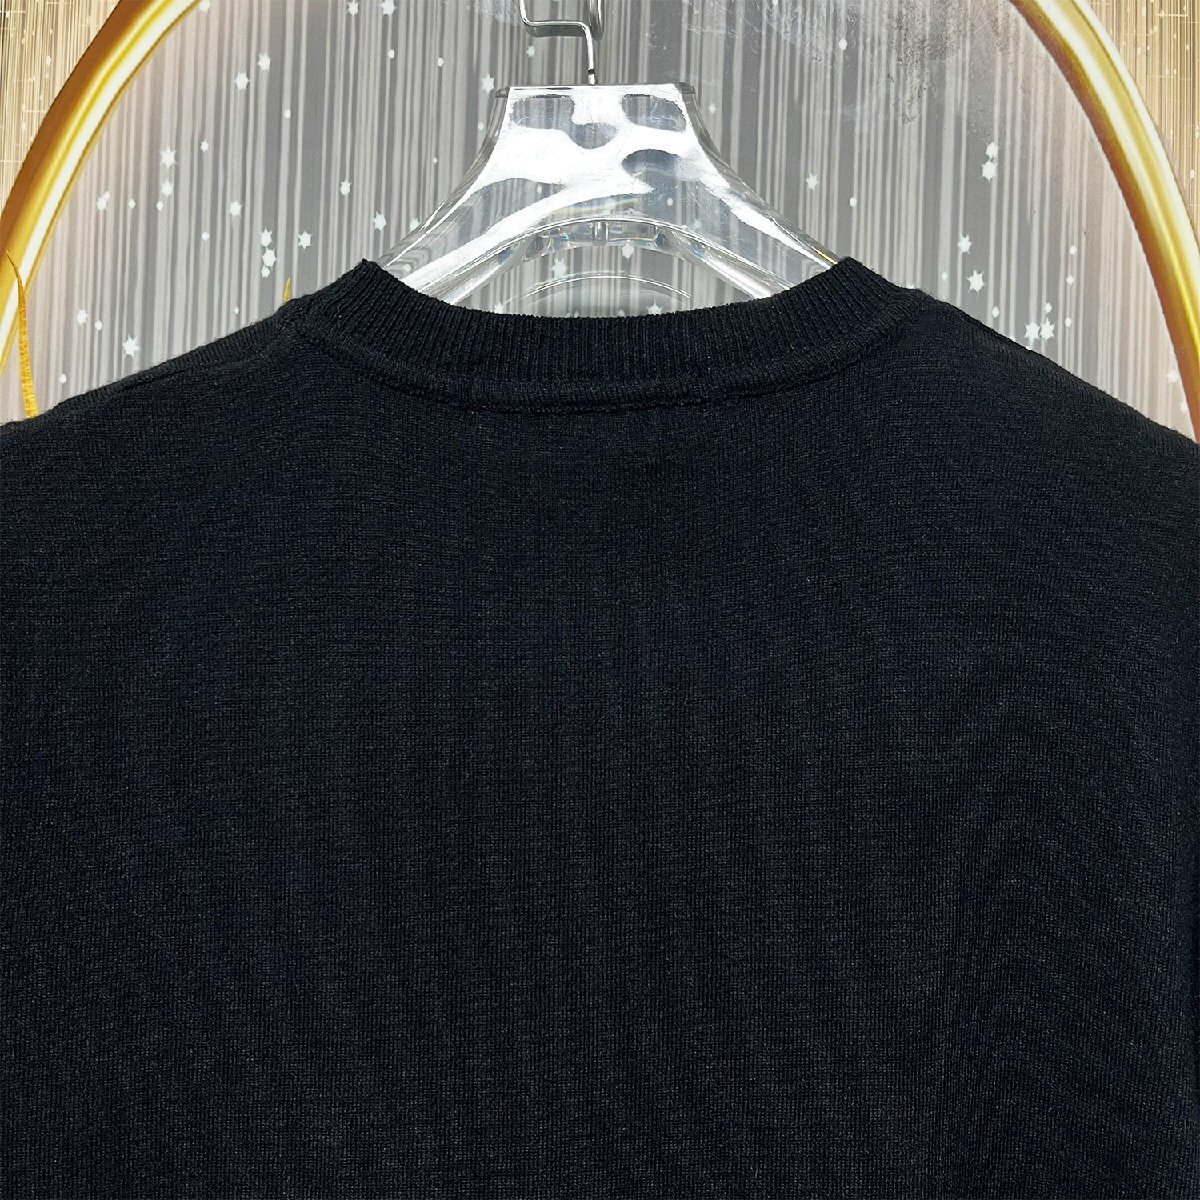  regular price 3 ten thousand *christian milada* milano departure * short sleeves T-shirt * high class wool fine quality stretch high class .. butterfly clean . summer knitted lady's L/48